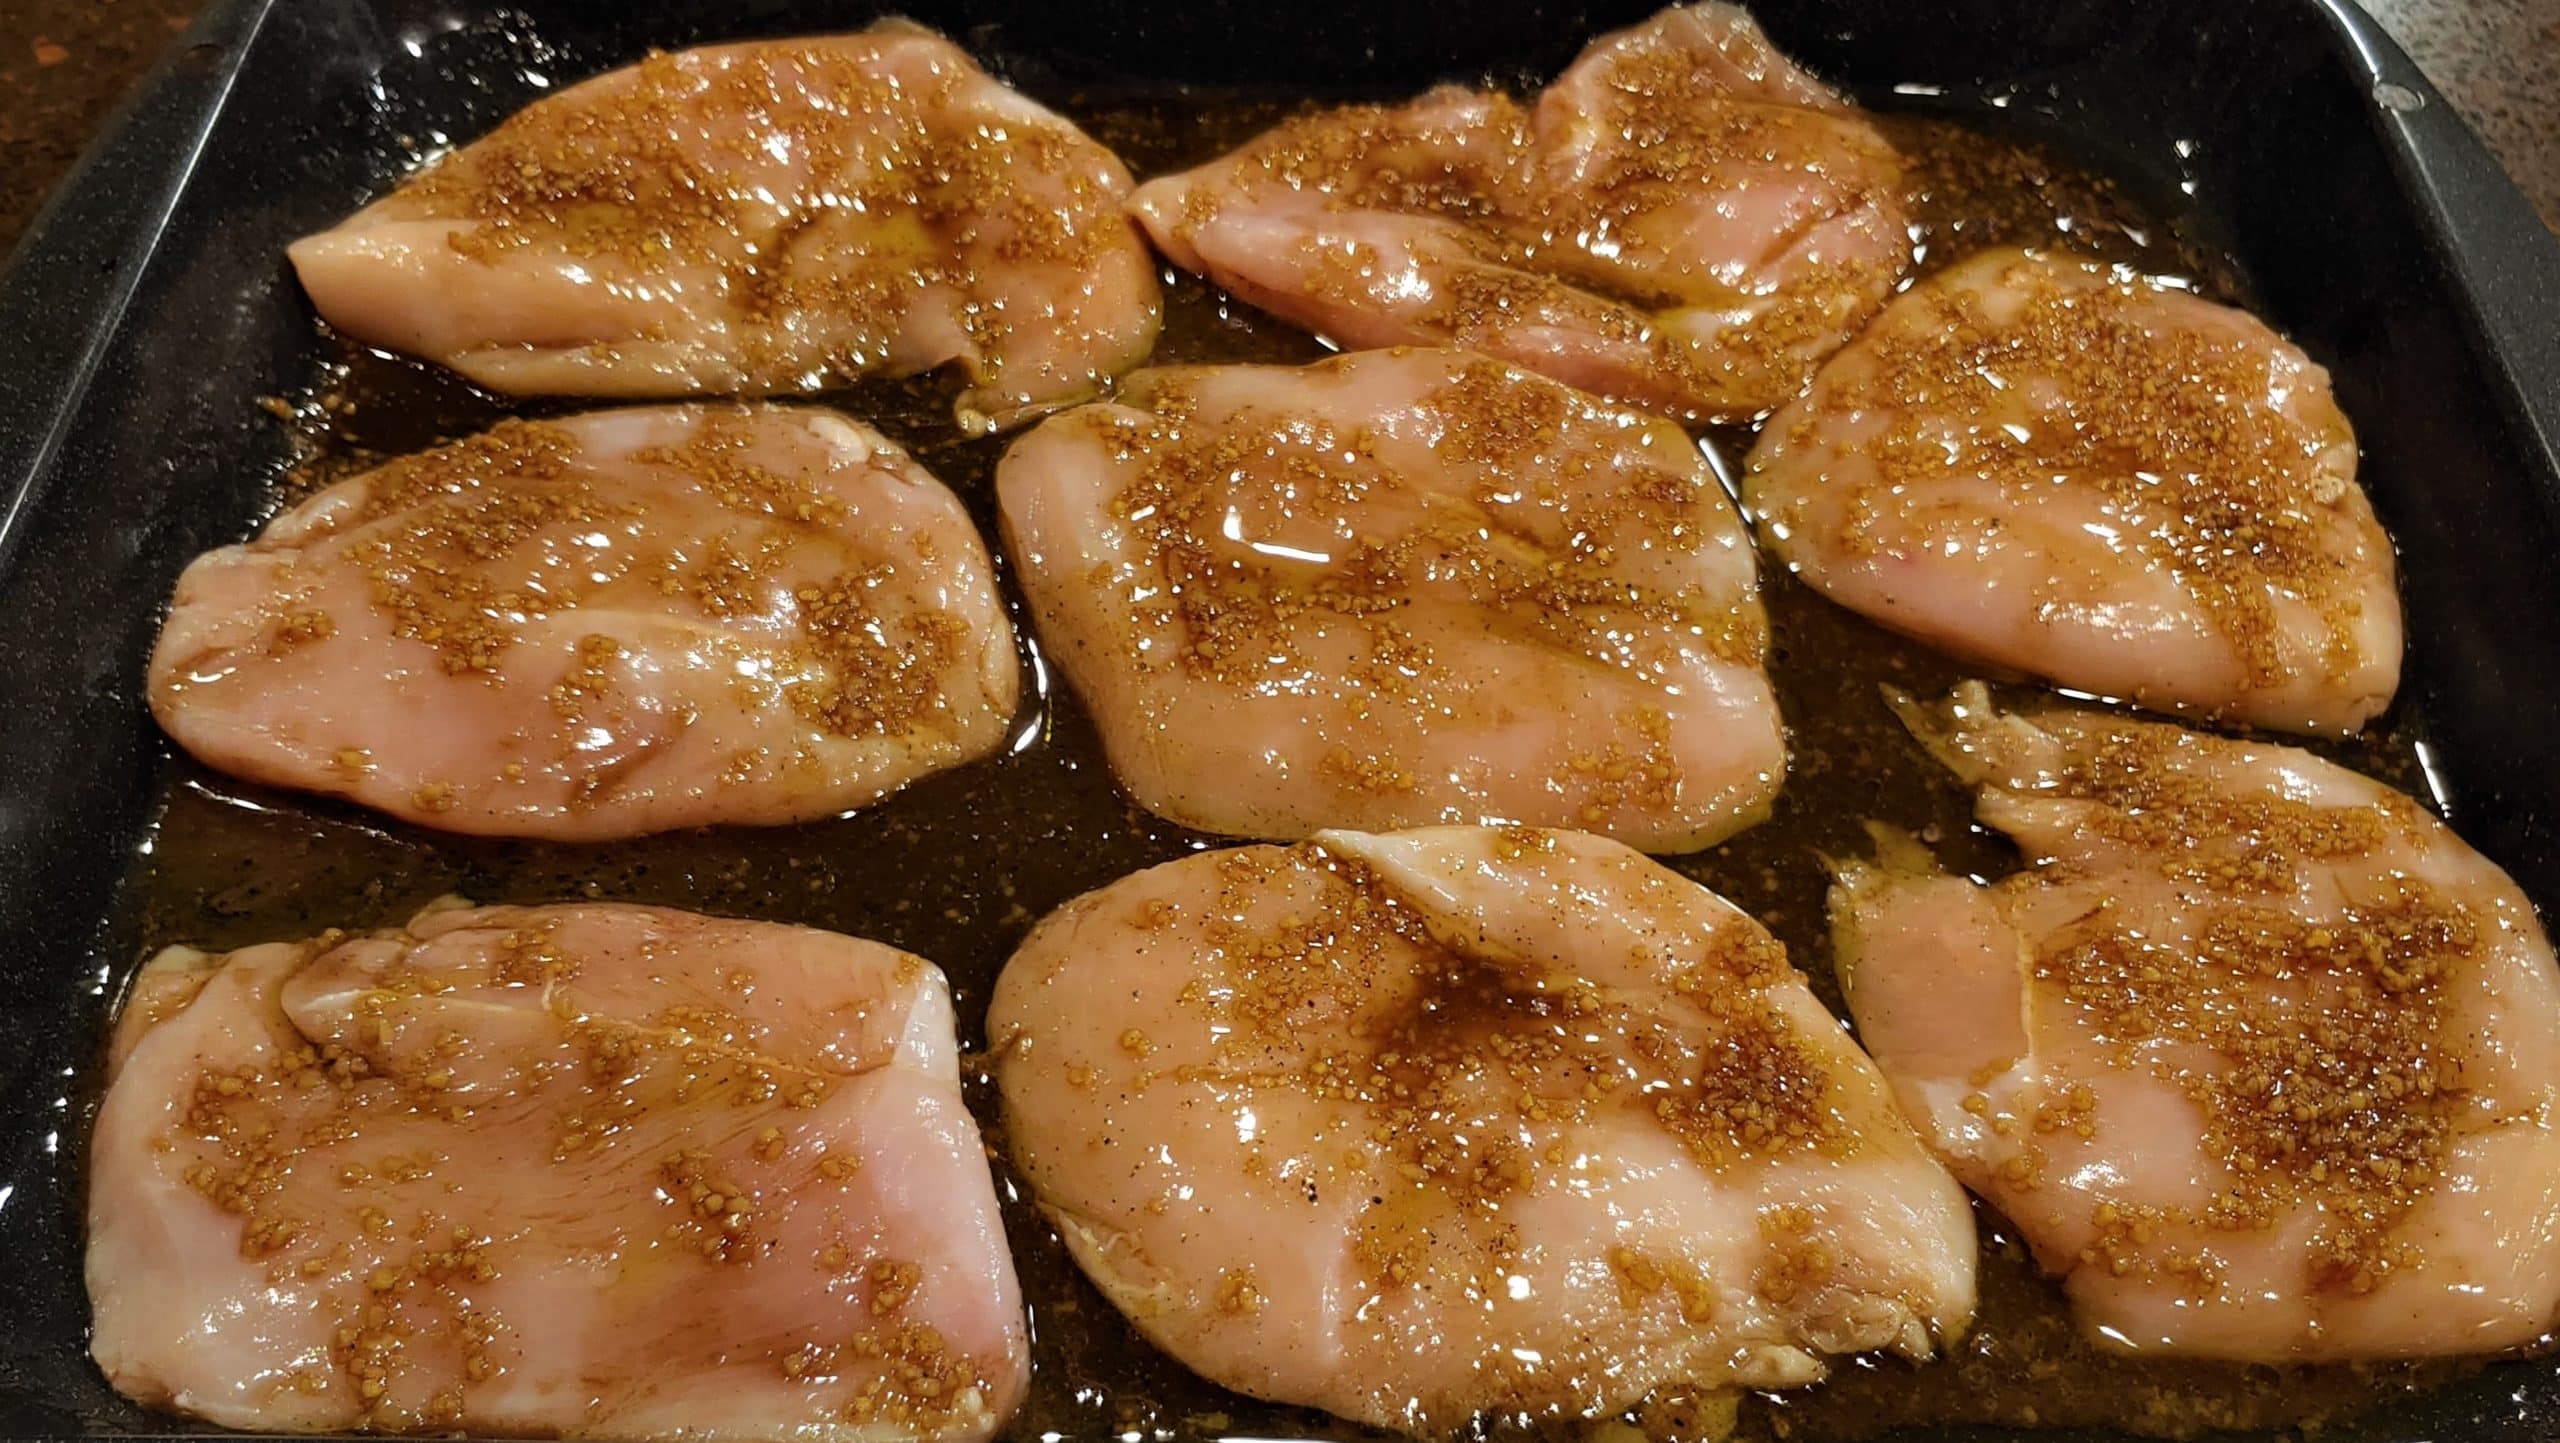 Balsamic Marinade over Chicken Breasts - Dining in with Danielle